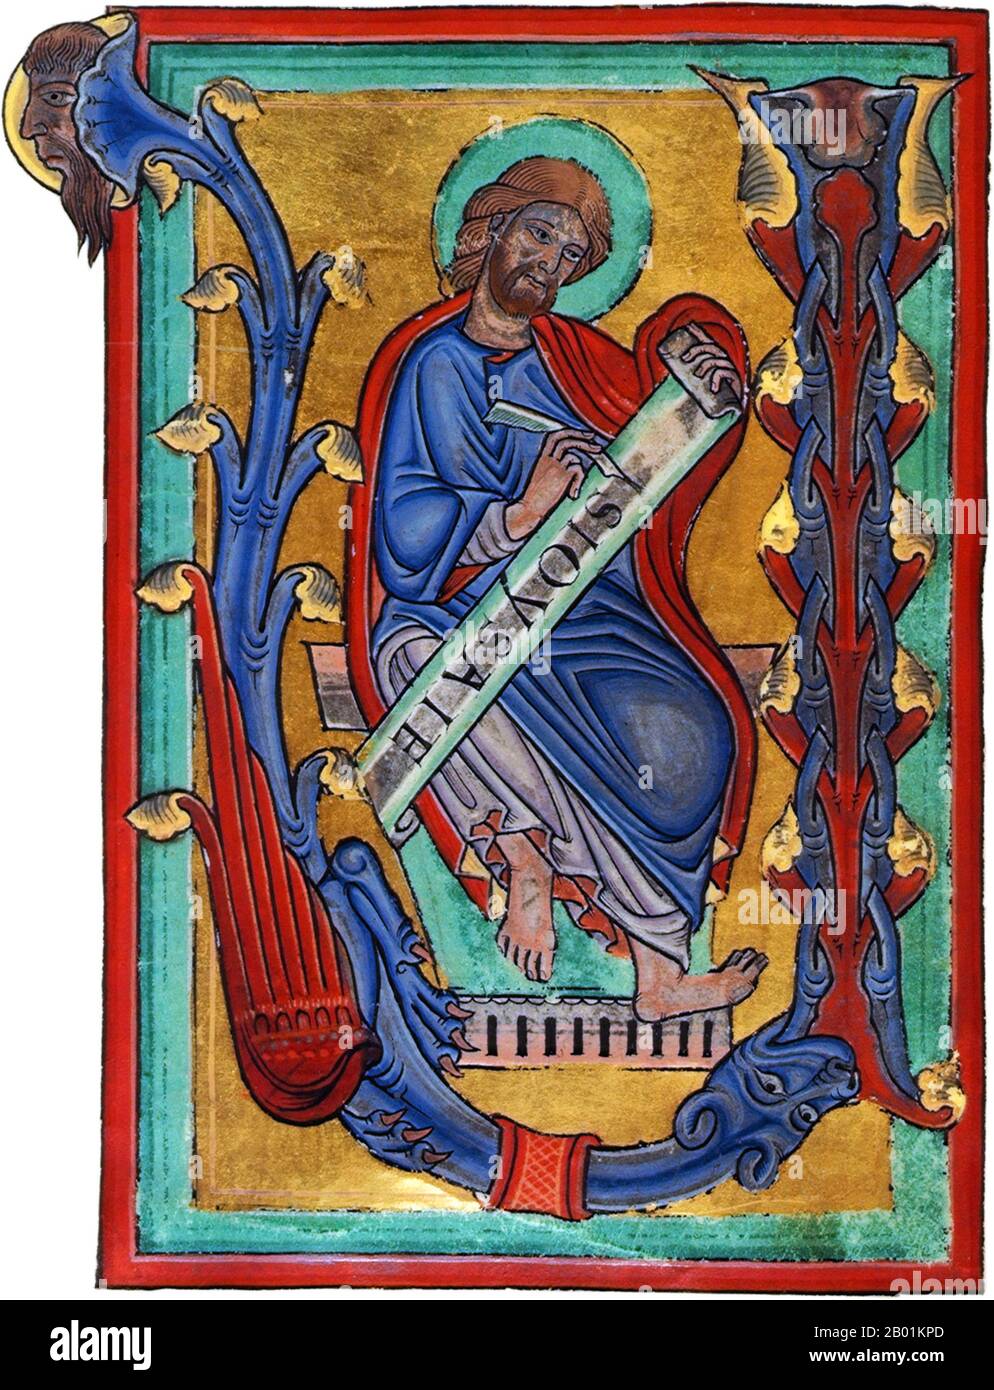 Belgium: The prophet Isaiah. Miniature painting from the Parc Abbey Bible, Louvain, 1148.  Isaiah was a prophet in the 8th-century BCE Kingdom of Judah. Jews and Christians consider the Book of Isaiah a part of their Biblical canon; he is the first listed (although not the earliest) of the neviim akharonim, the later prophets. Many of the New Testament teachings of Jesus refer to the book of Isaiah. Stock Photo